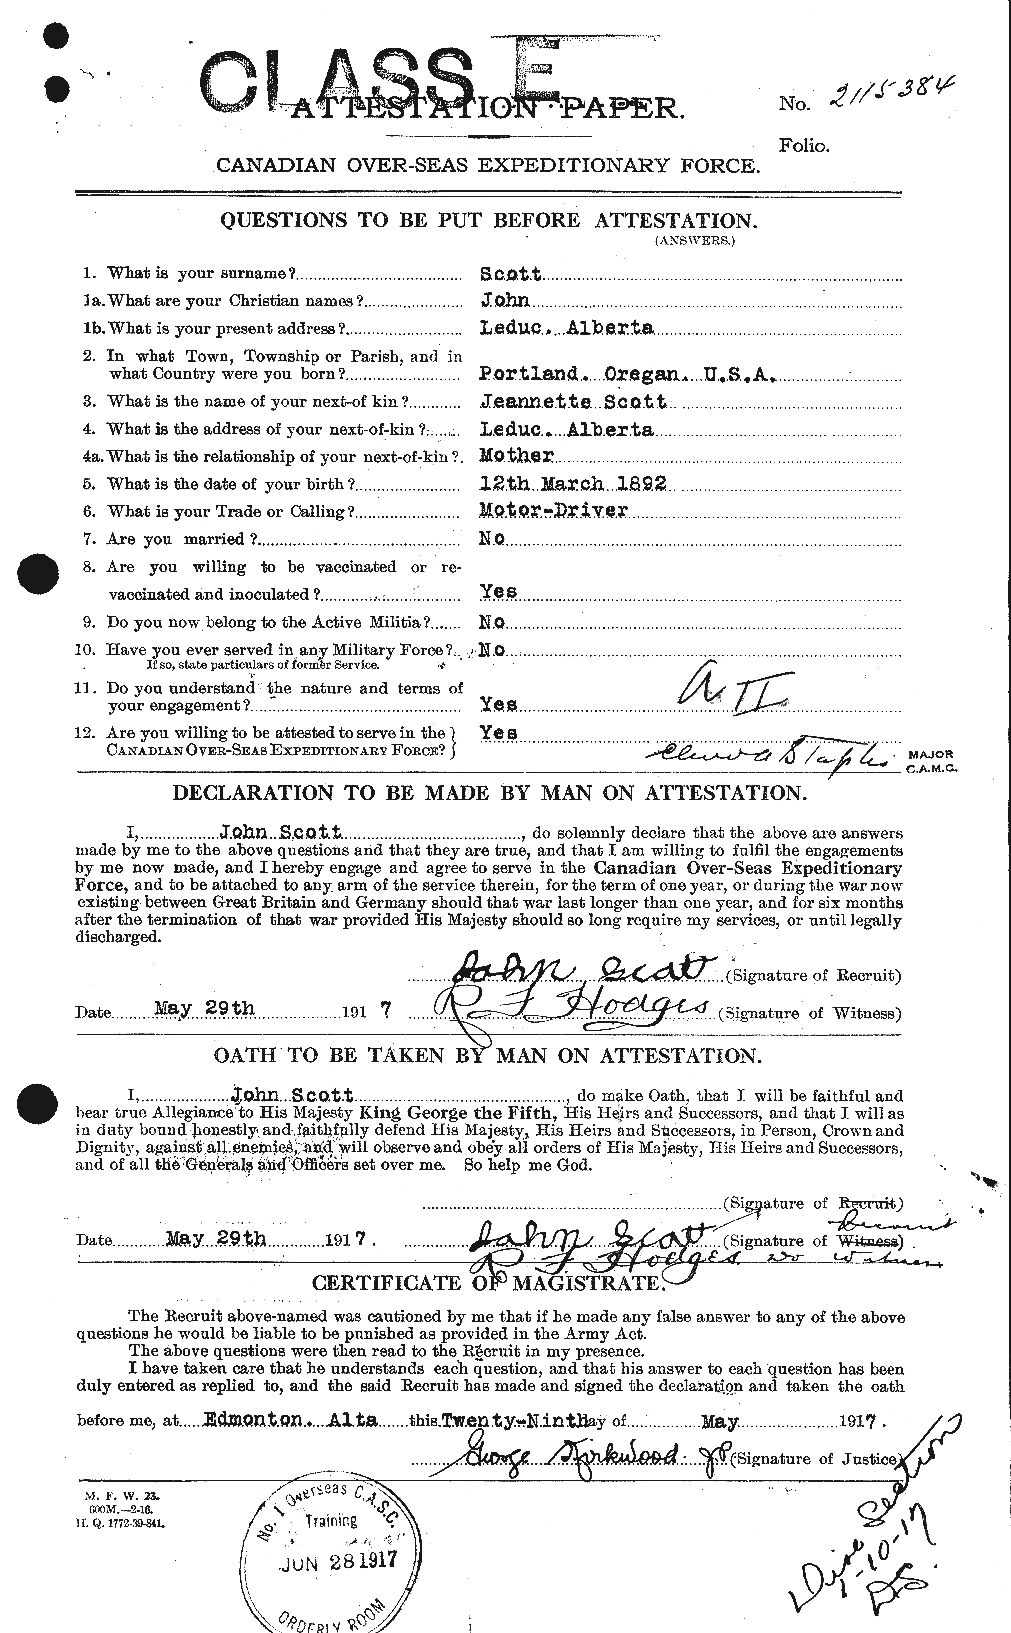 Personnel Records of the First World War - CEF 084892a